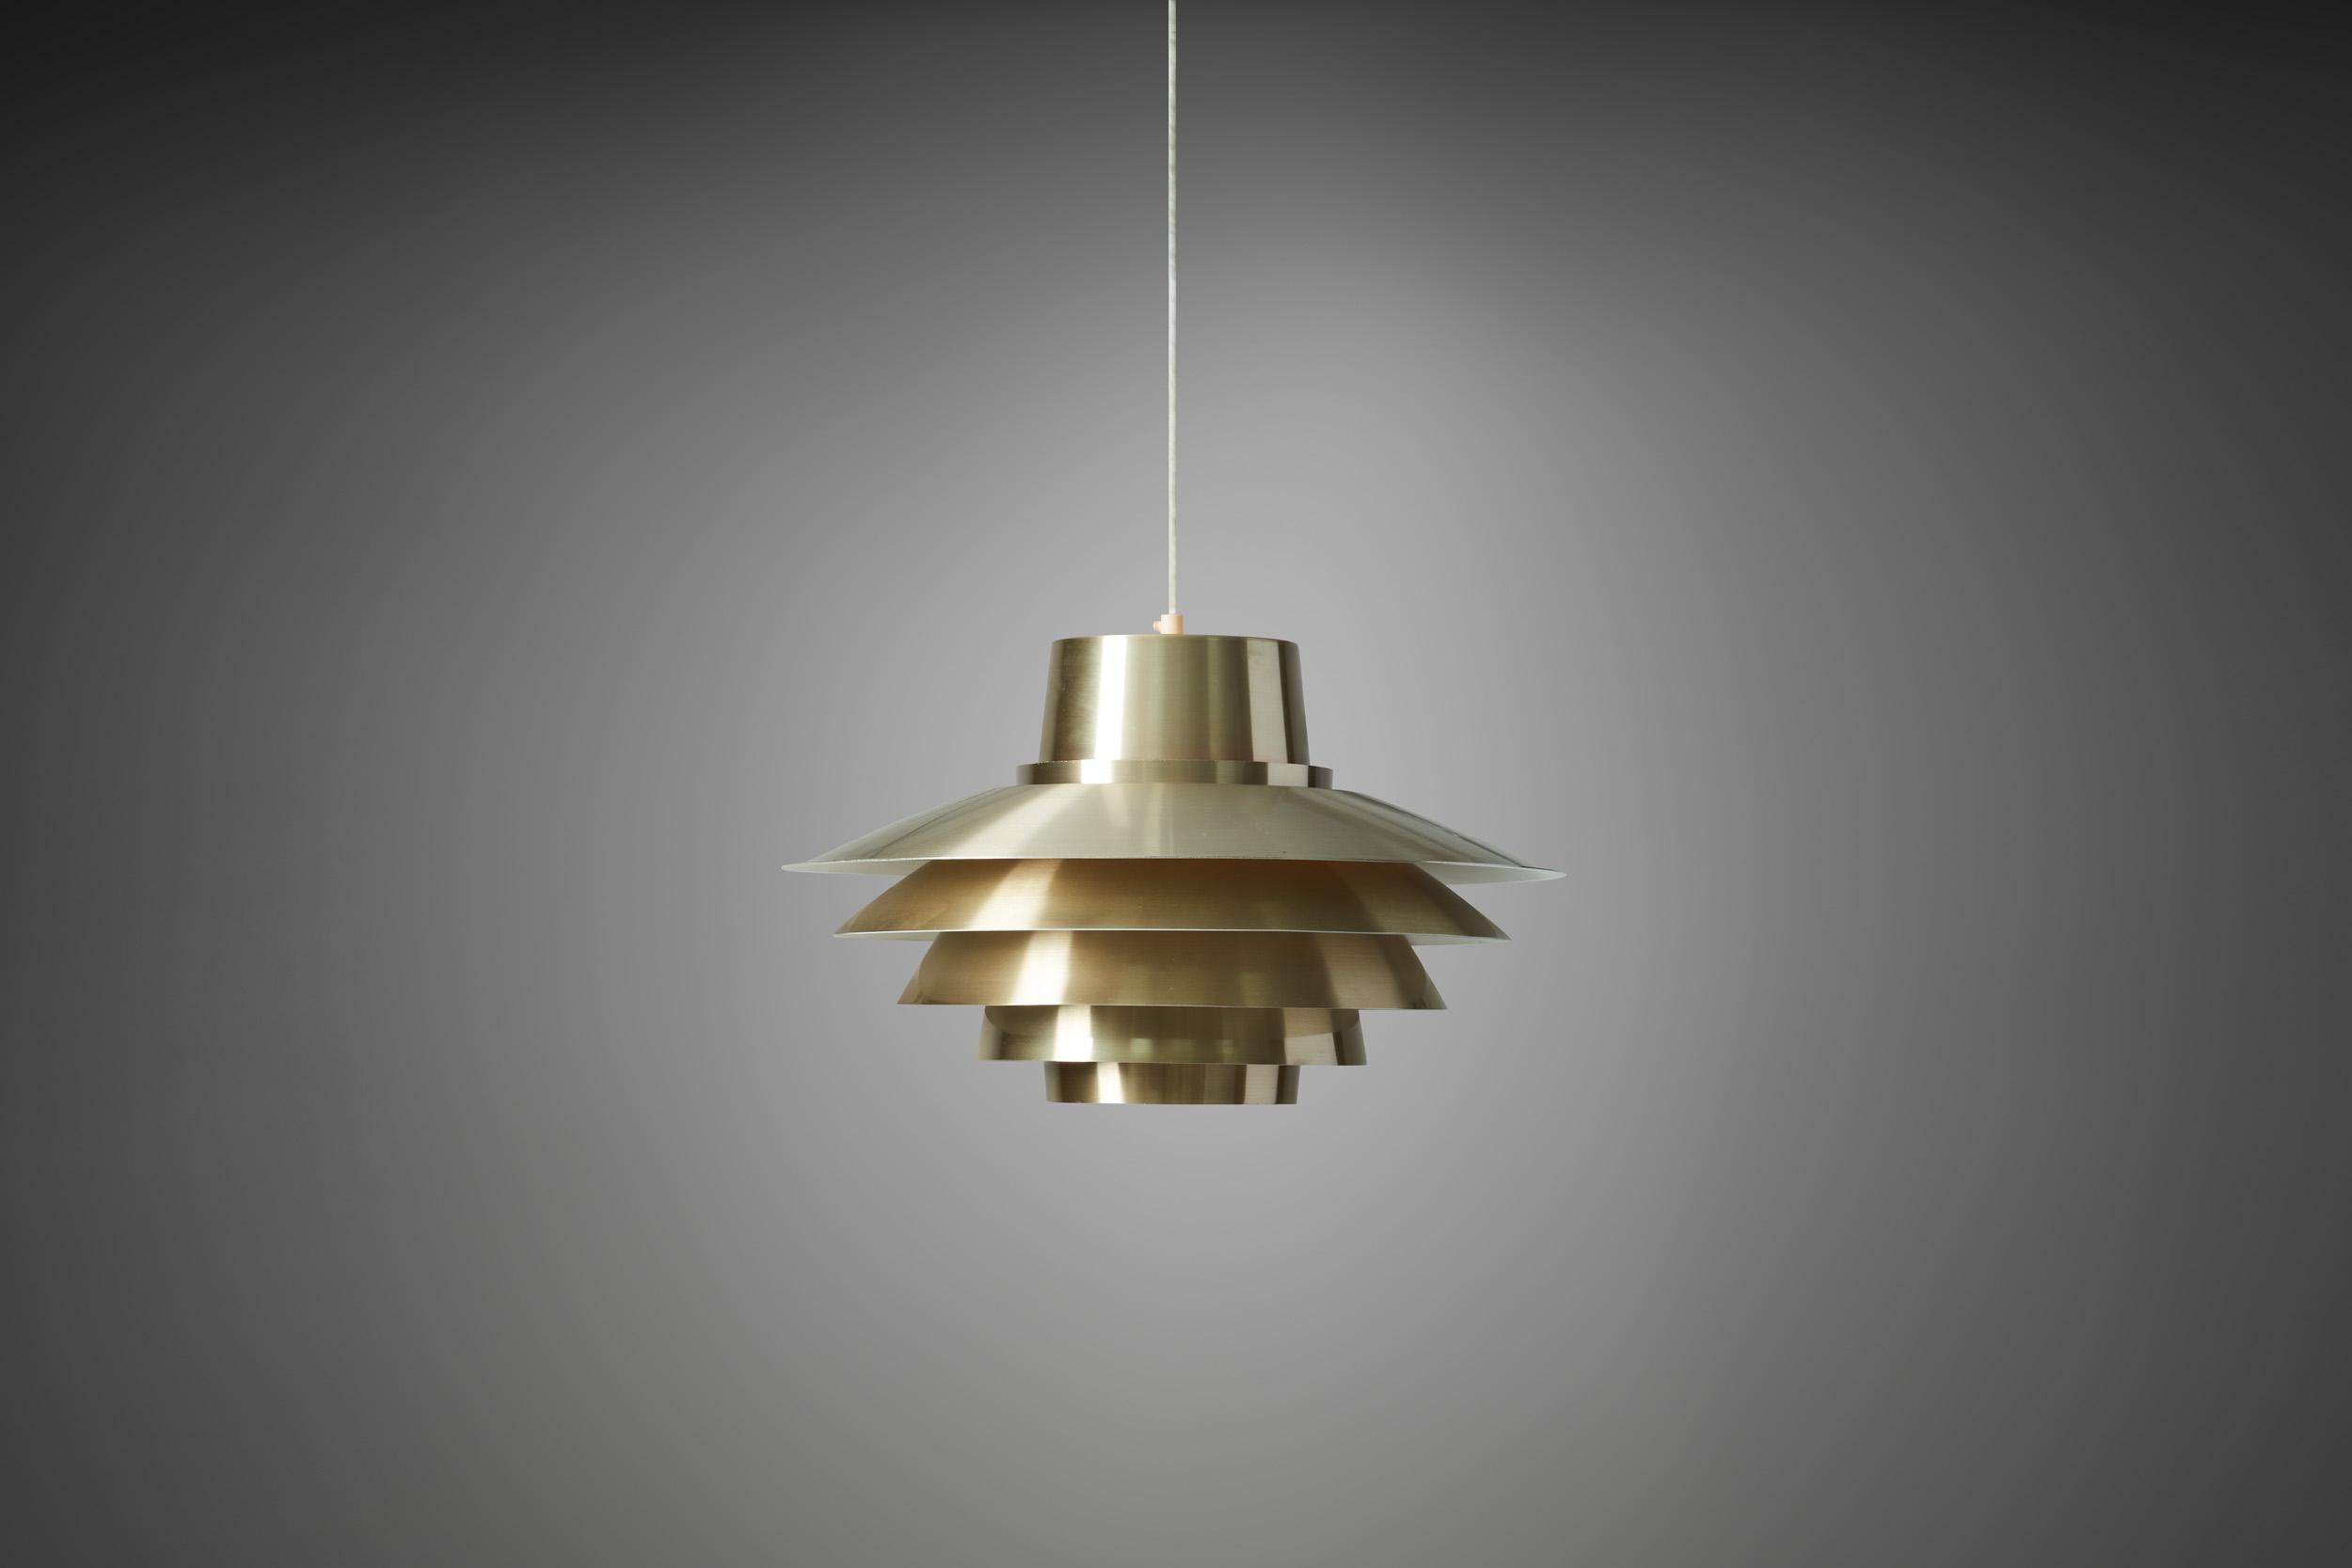 The “Verona” pendant is easily one of the most recognizable lighting designs of the Scandinavian mid-century. Its layered look is unmistakeable and became synonymous with Svend Middelboe. 

The manufacturer, Nordisk Solar Compagni Lights, won a